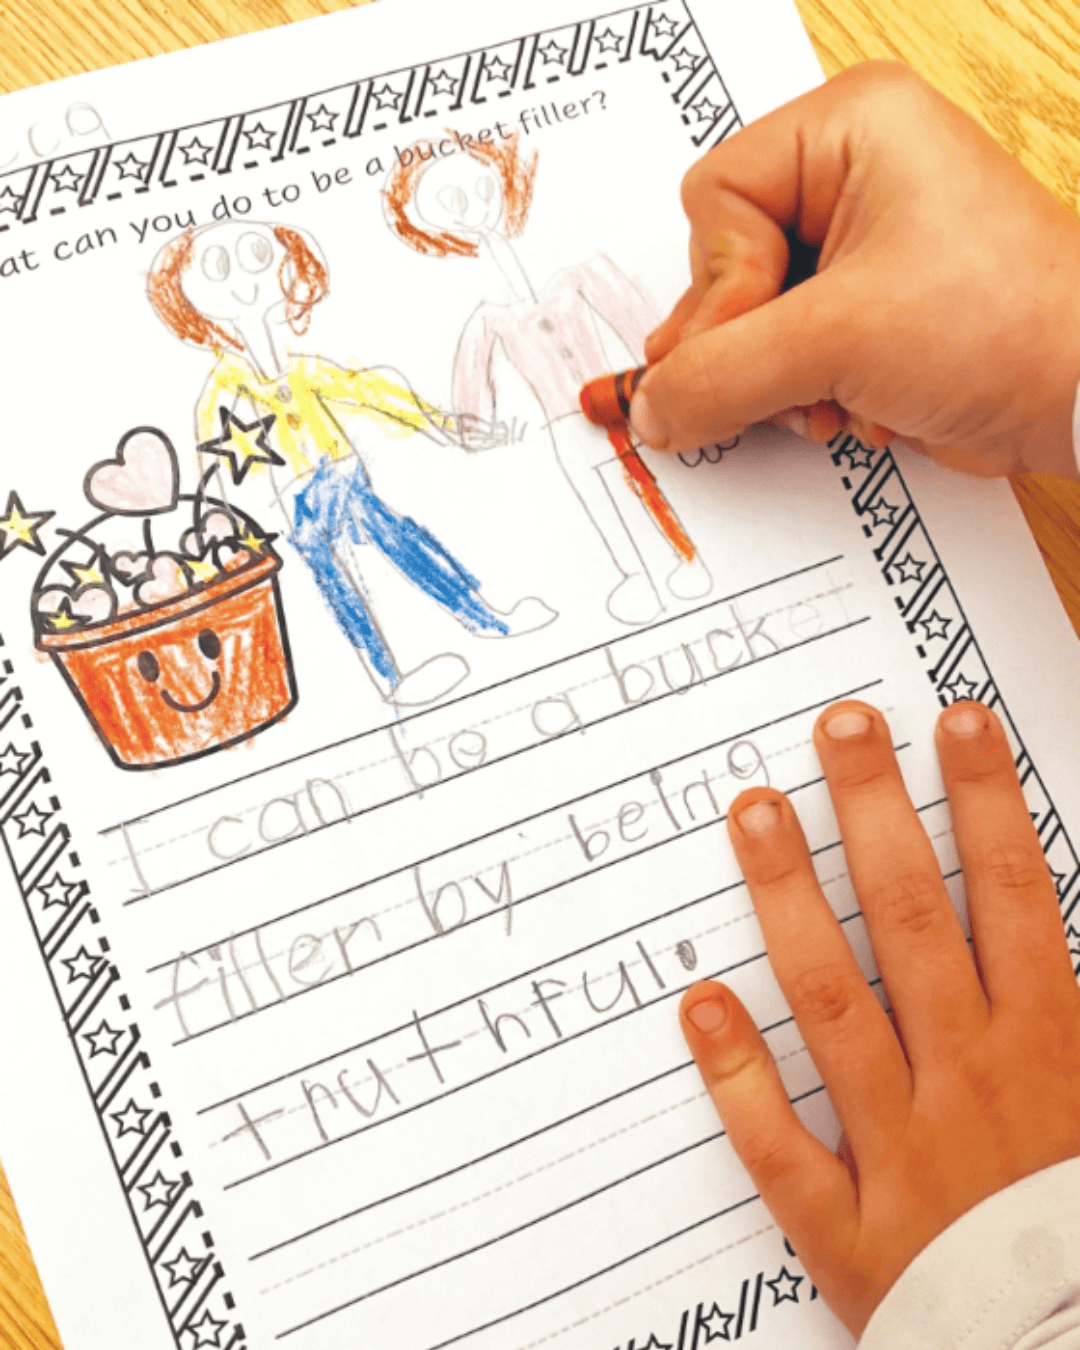 In the left image Sabrinna holds a child’s drawing of a bucket with pom-poms, the right image shows a worksheet with the words ‘I can be a bucket filler by being truthful.’